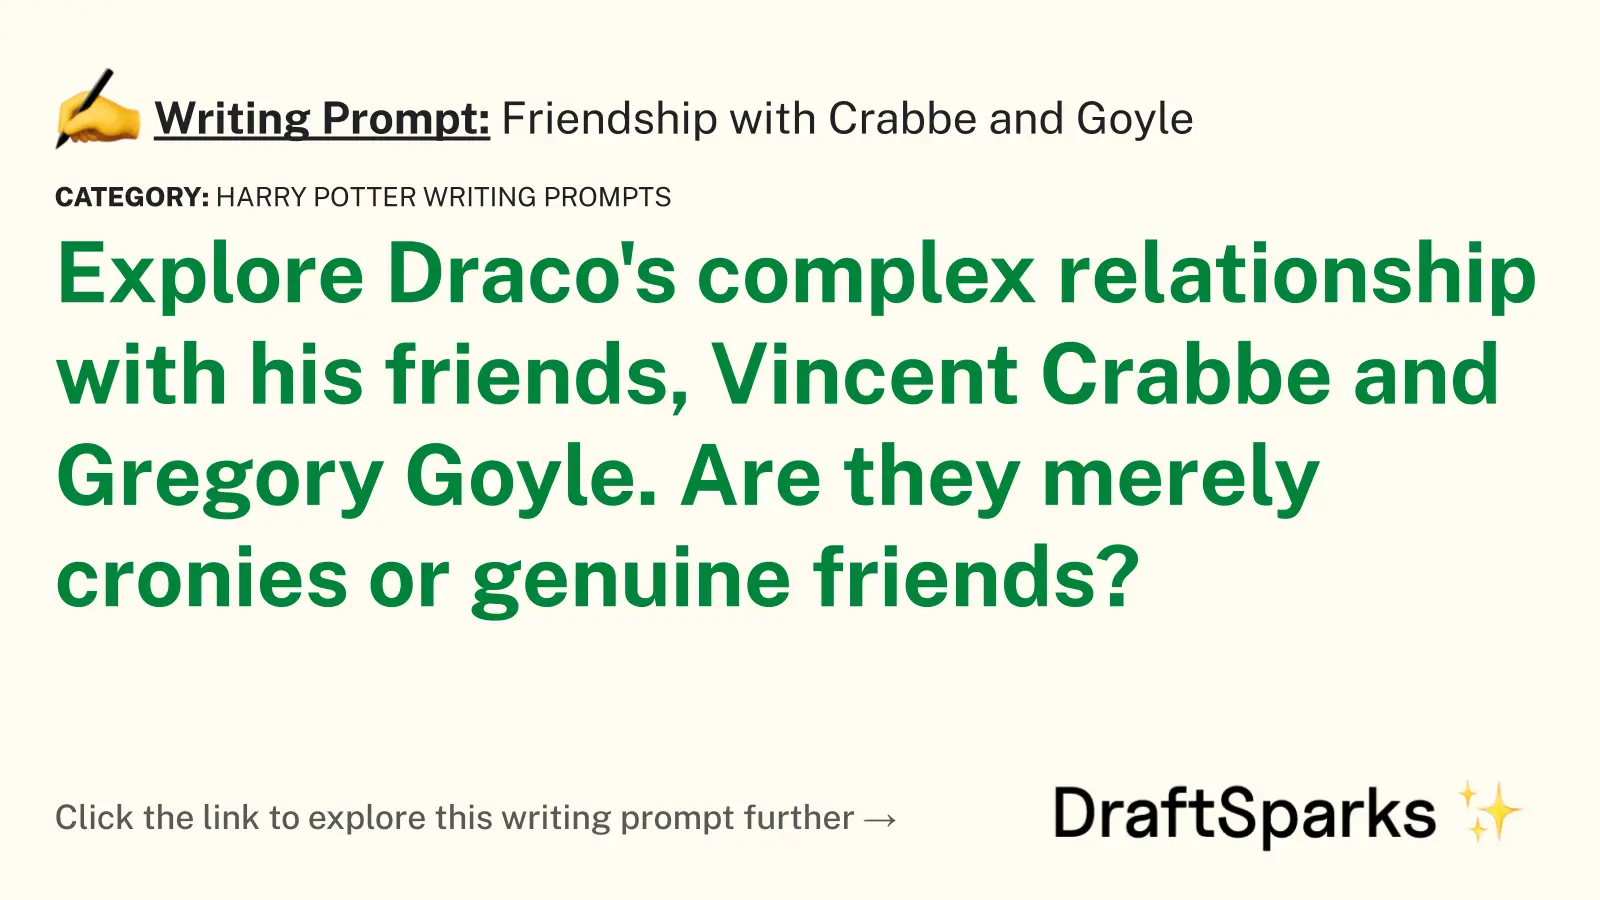 Friendship with Crabbe and Goyle